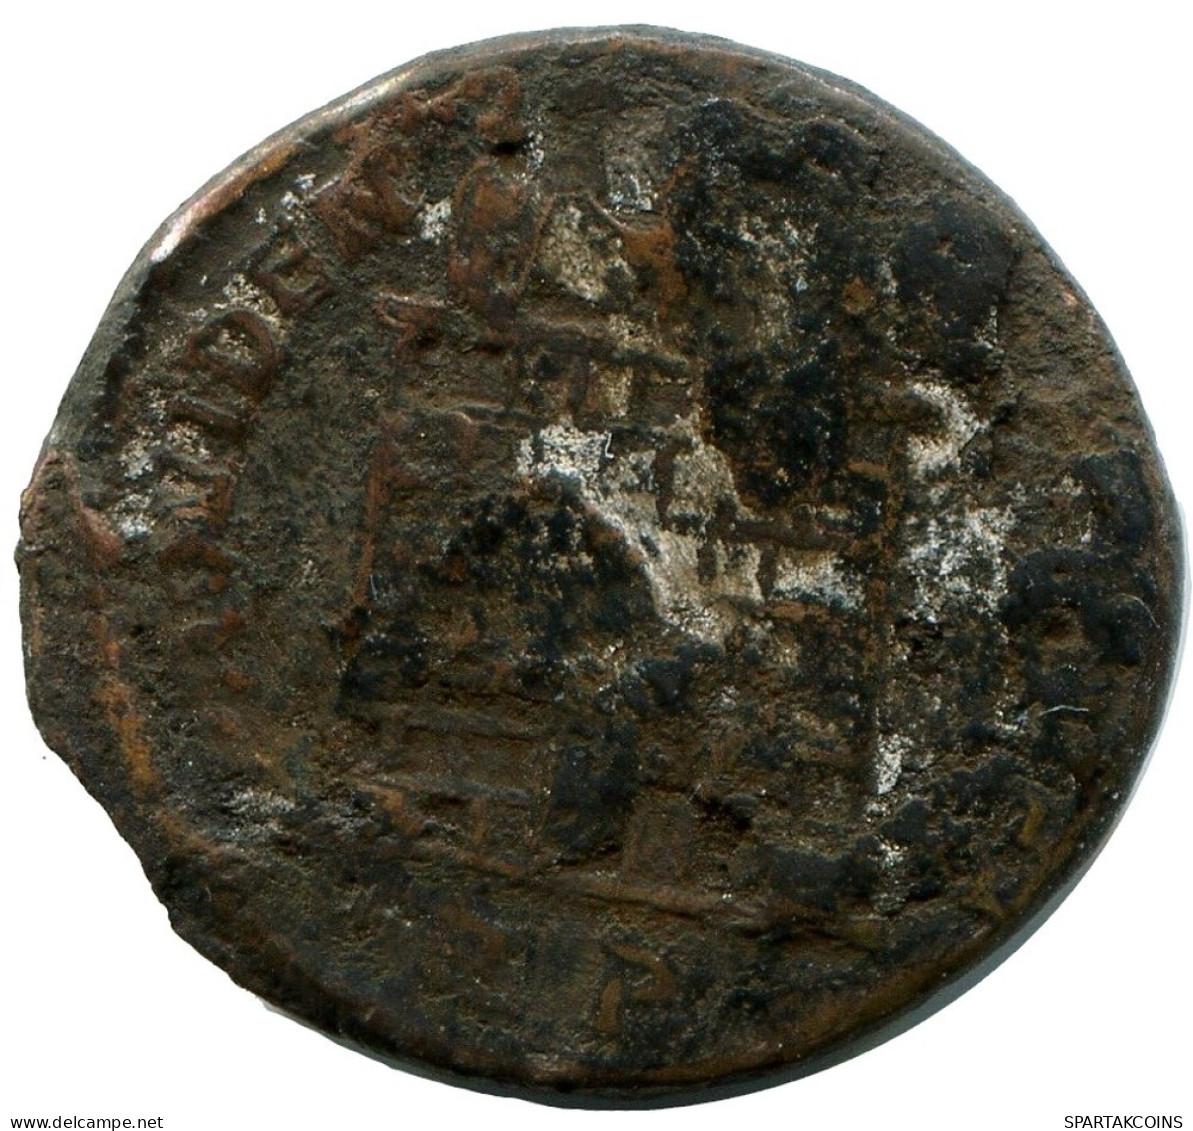 CONSTANTINE I MINTED IN ROME ITALY FOUND IN IHNASYAH HOARD EGYPT #ANC11156.14.E.A - The Christian Empire (307 AD To 363 AD)